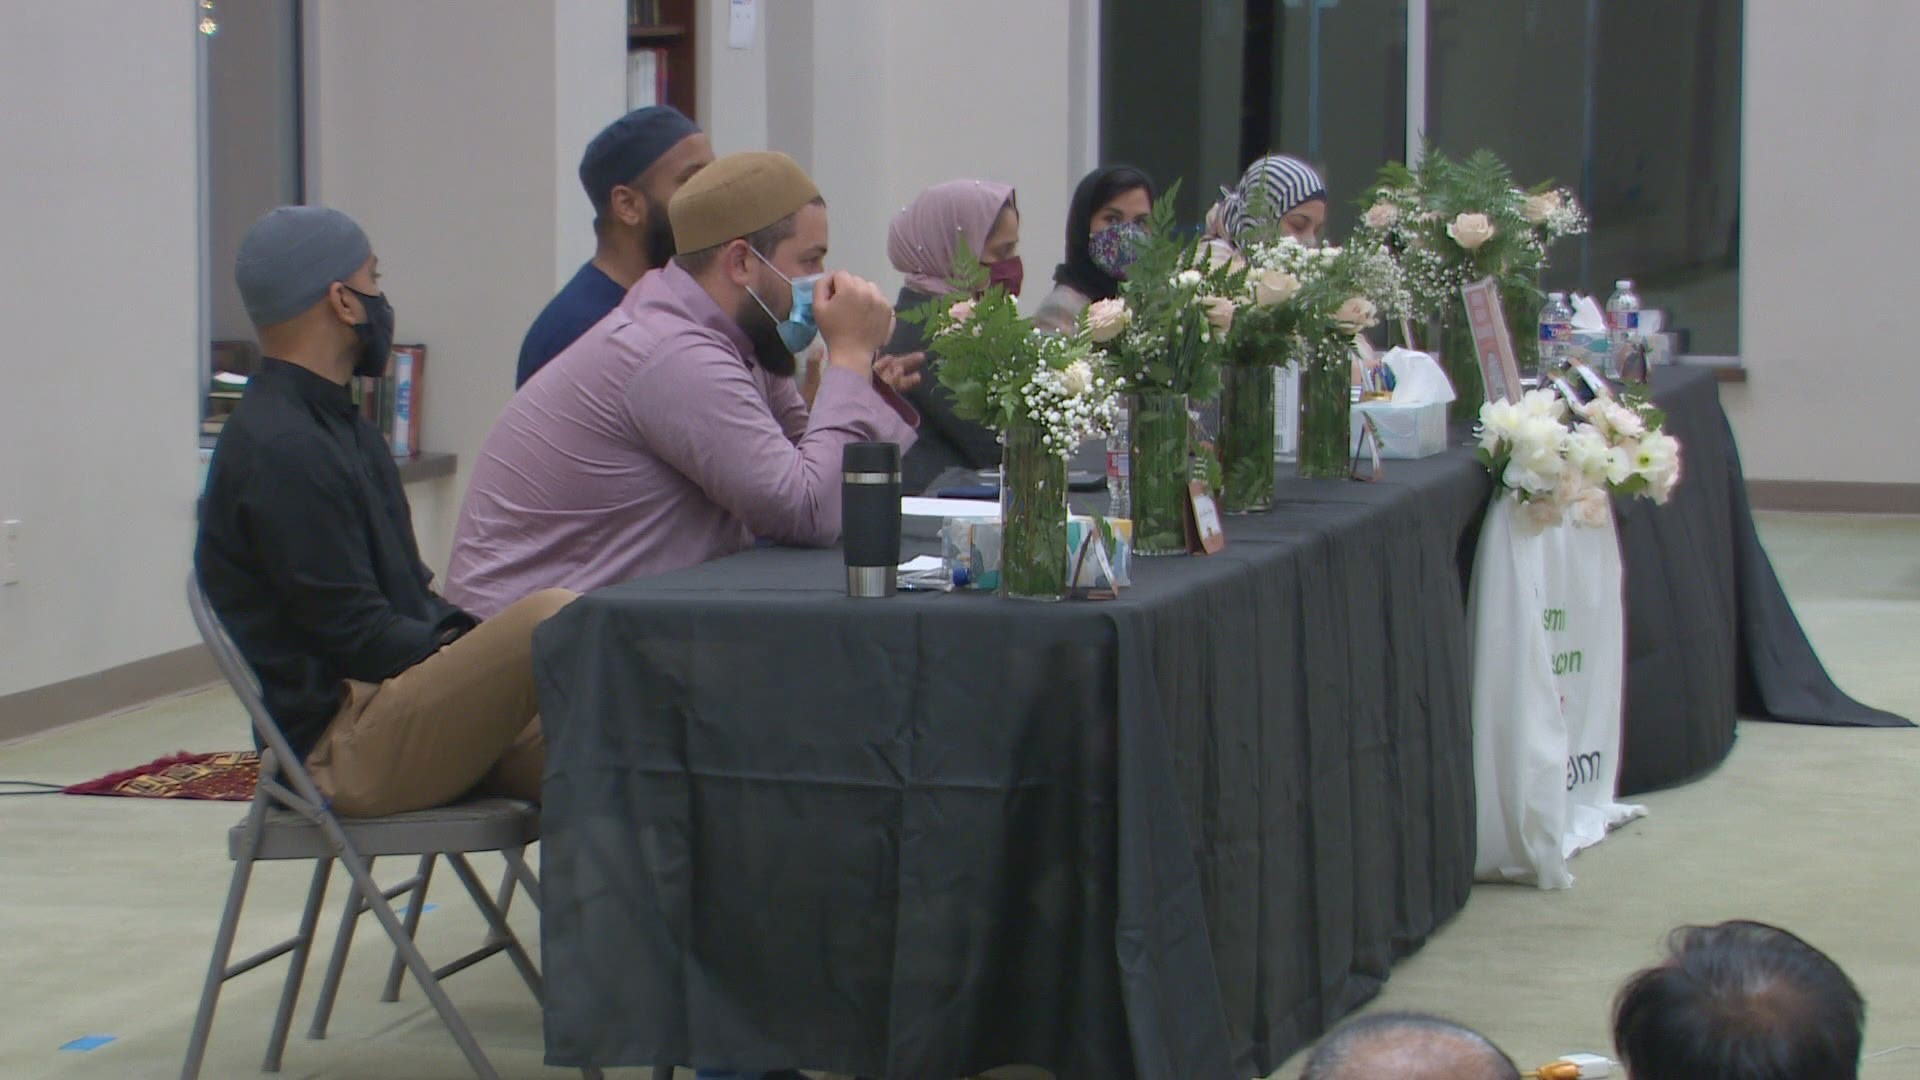 "This event has definitely devastated our community," said Imam Abdul Bashir of the Islamic Association of Allen. Bashir said the deaths have rocked the group.